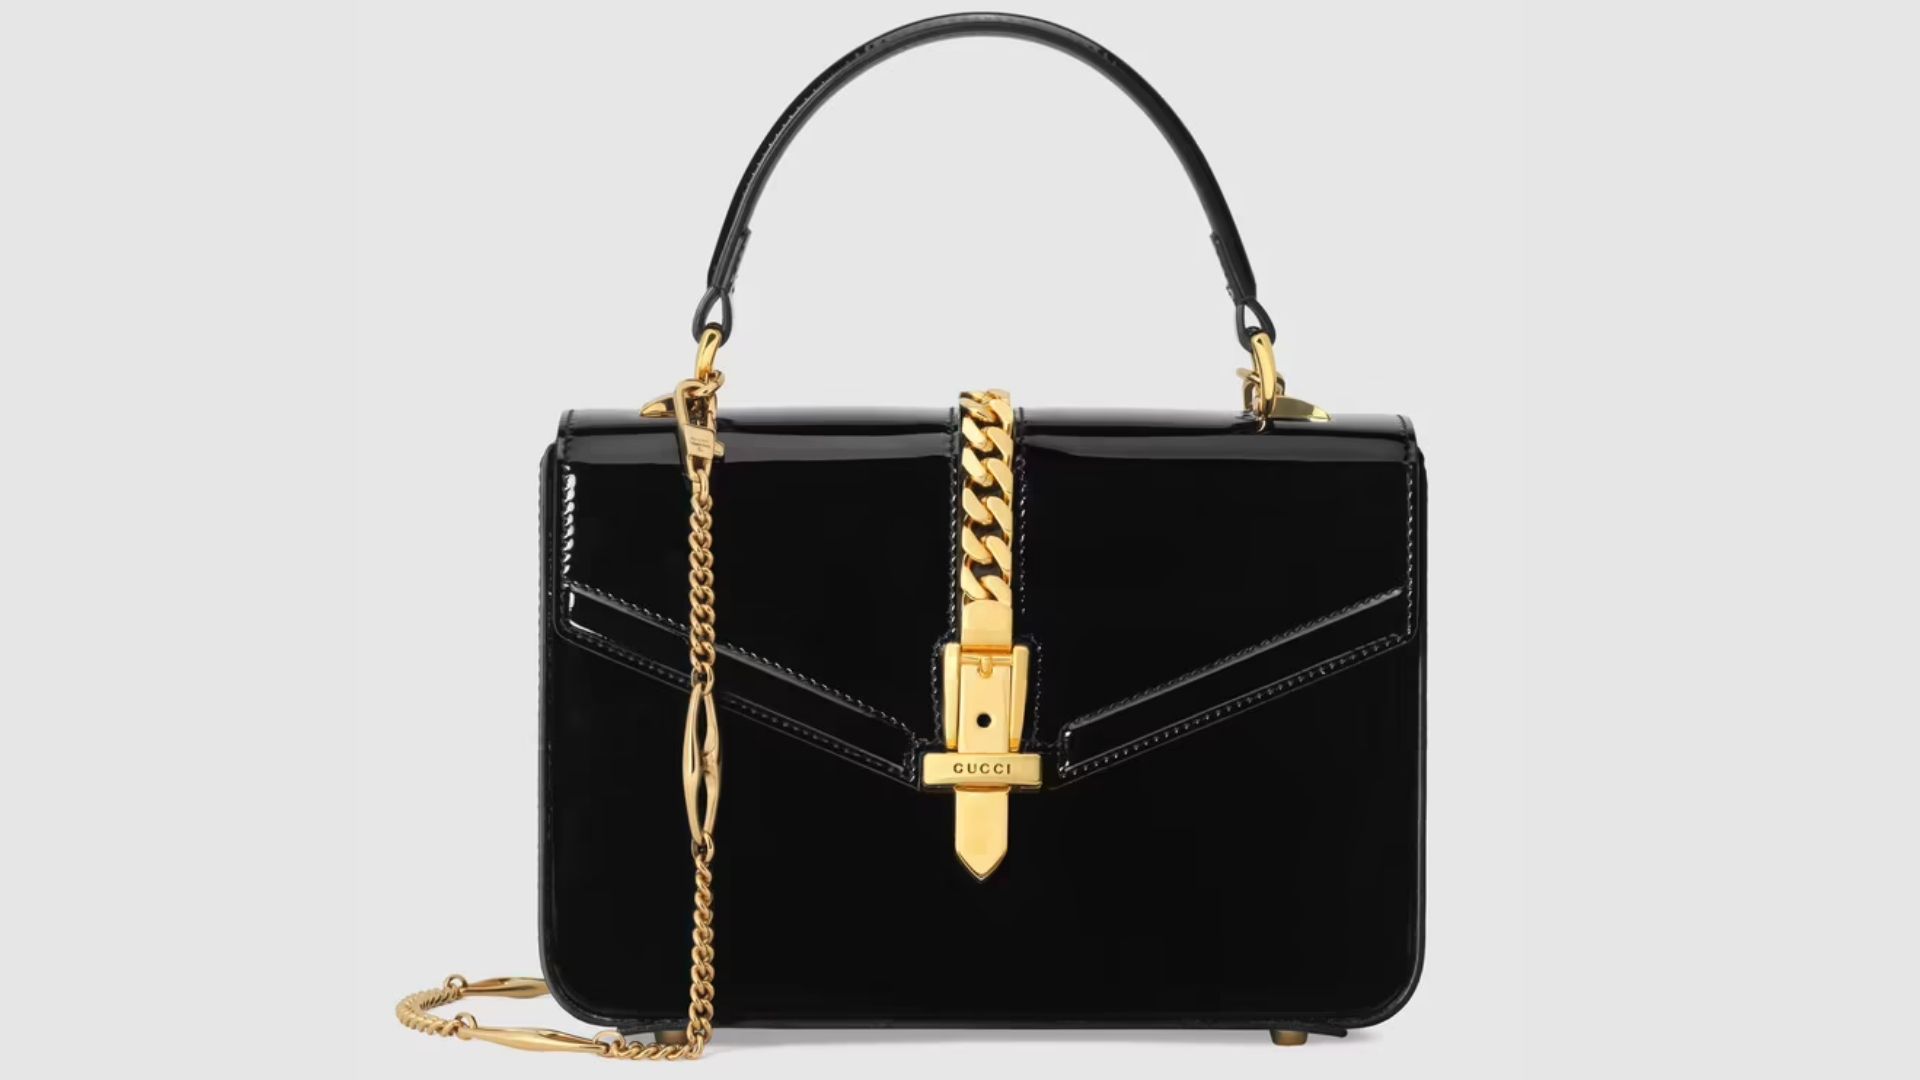 Iconic Gucci bags: Gucci Sylvie